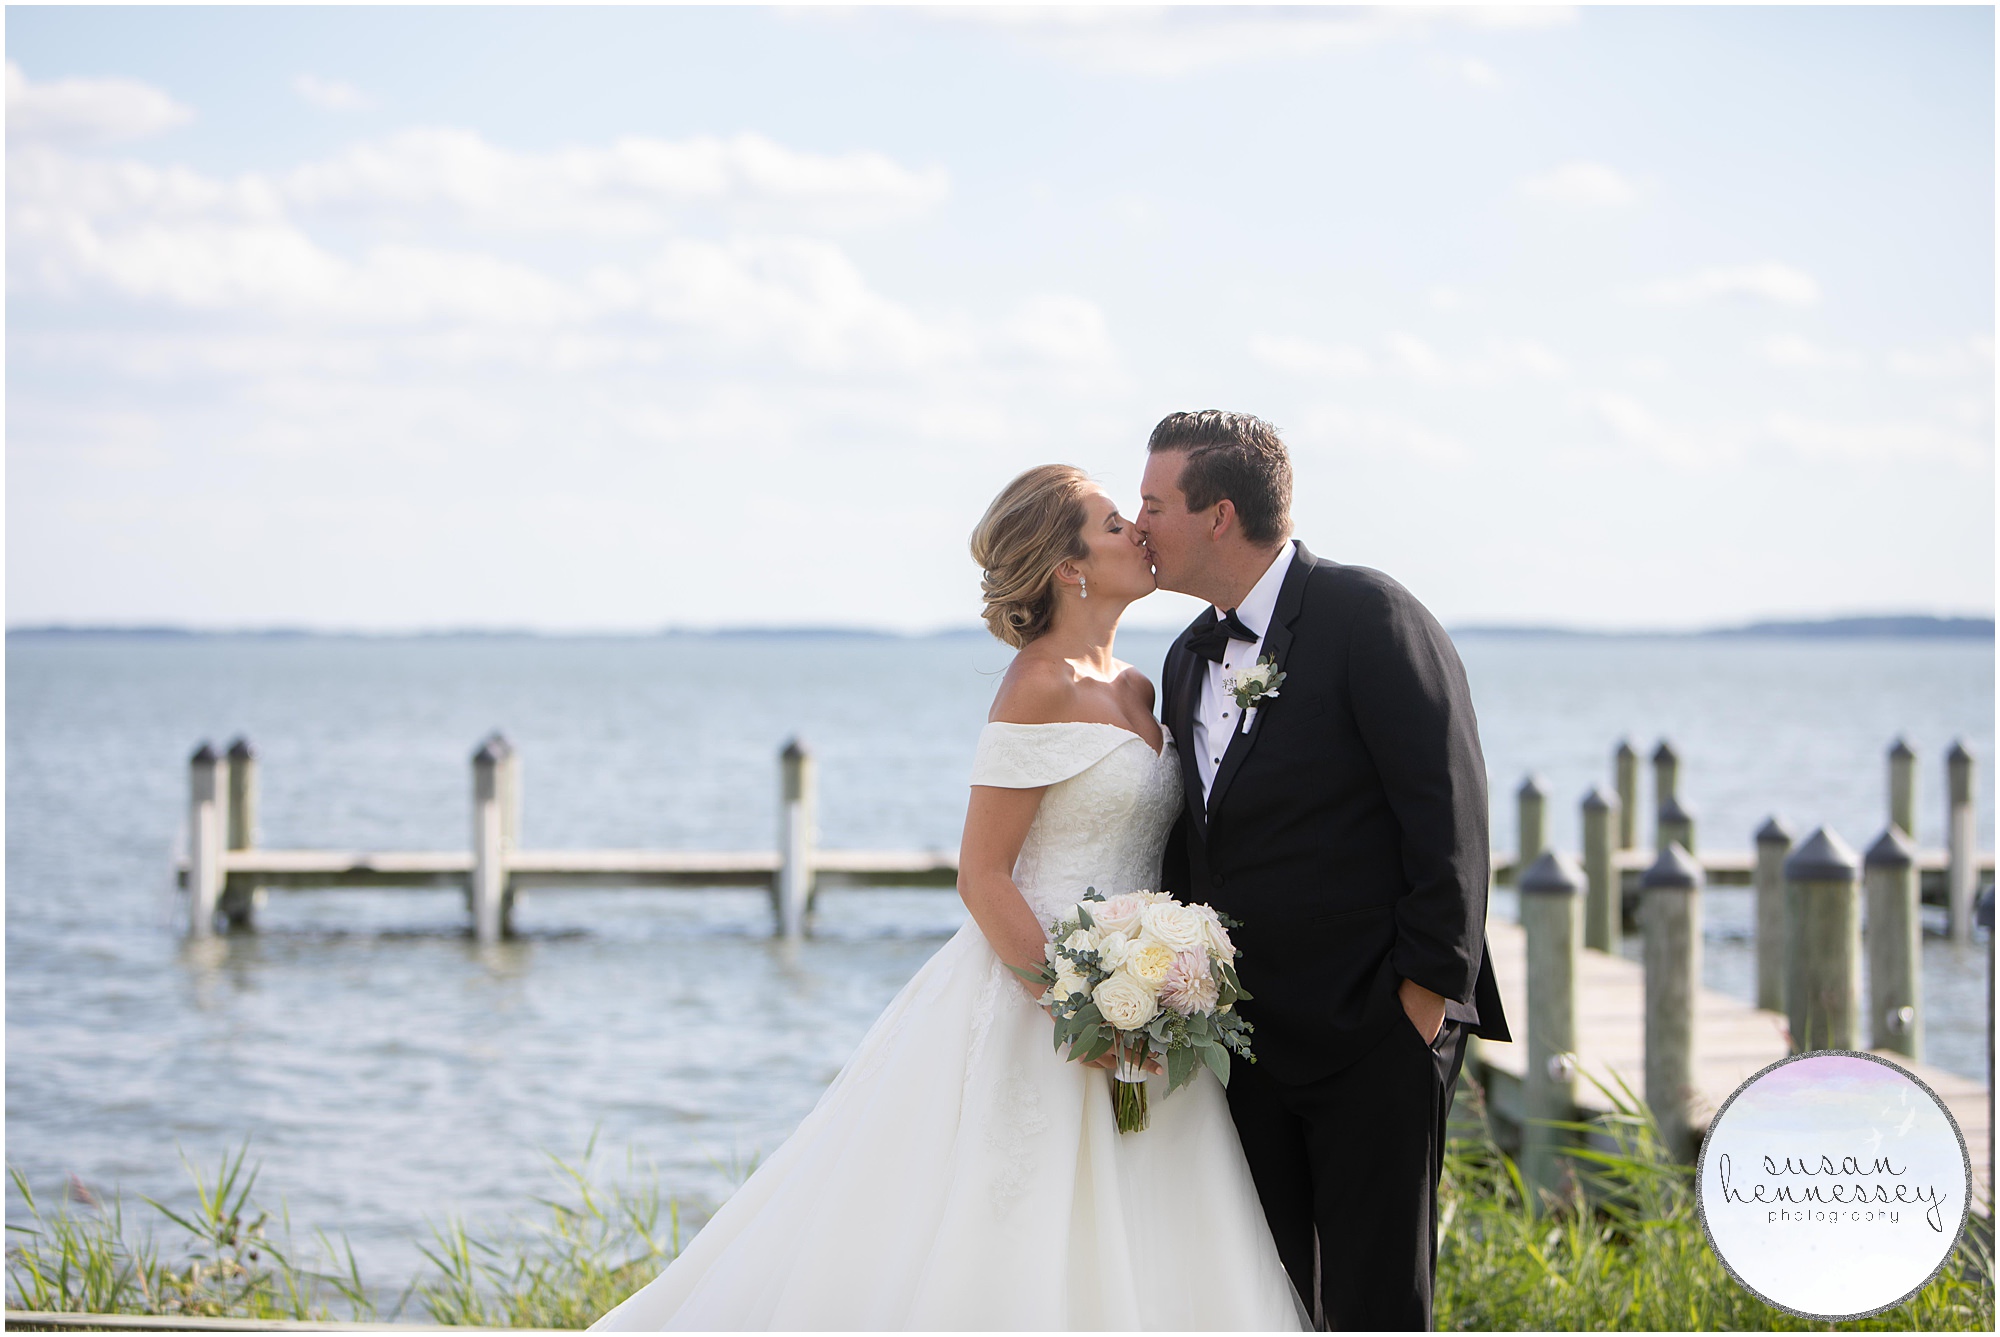 A bride and groom kiss in front of the pier at Rehoboth Beach Country Club